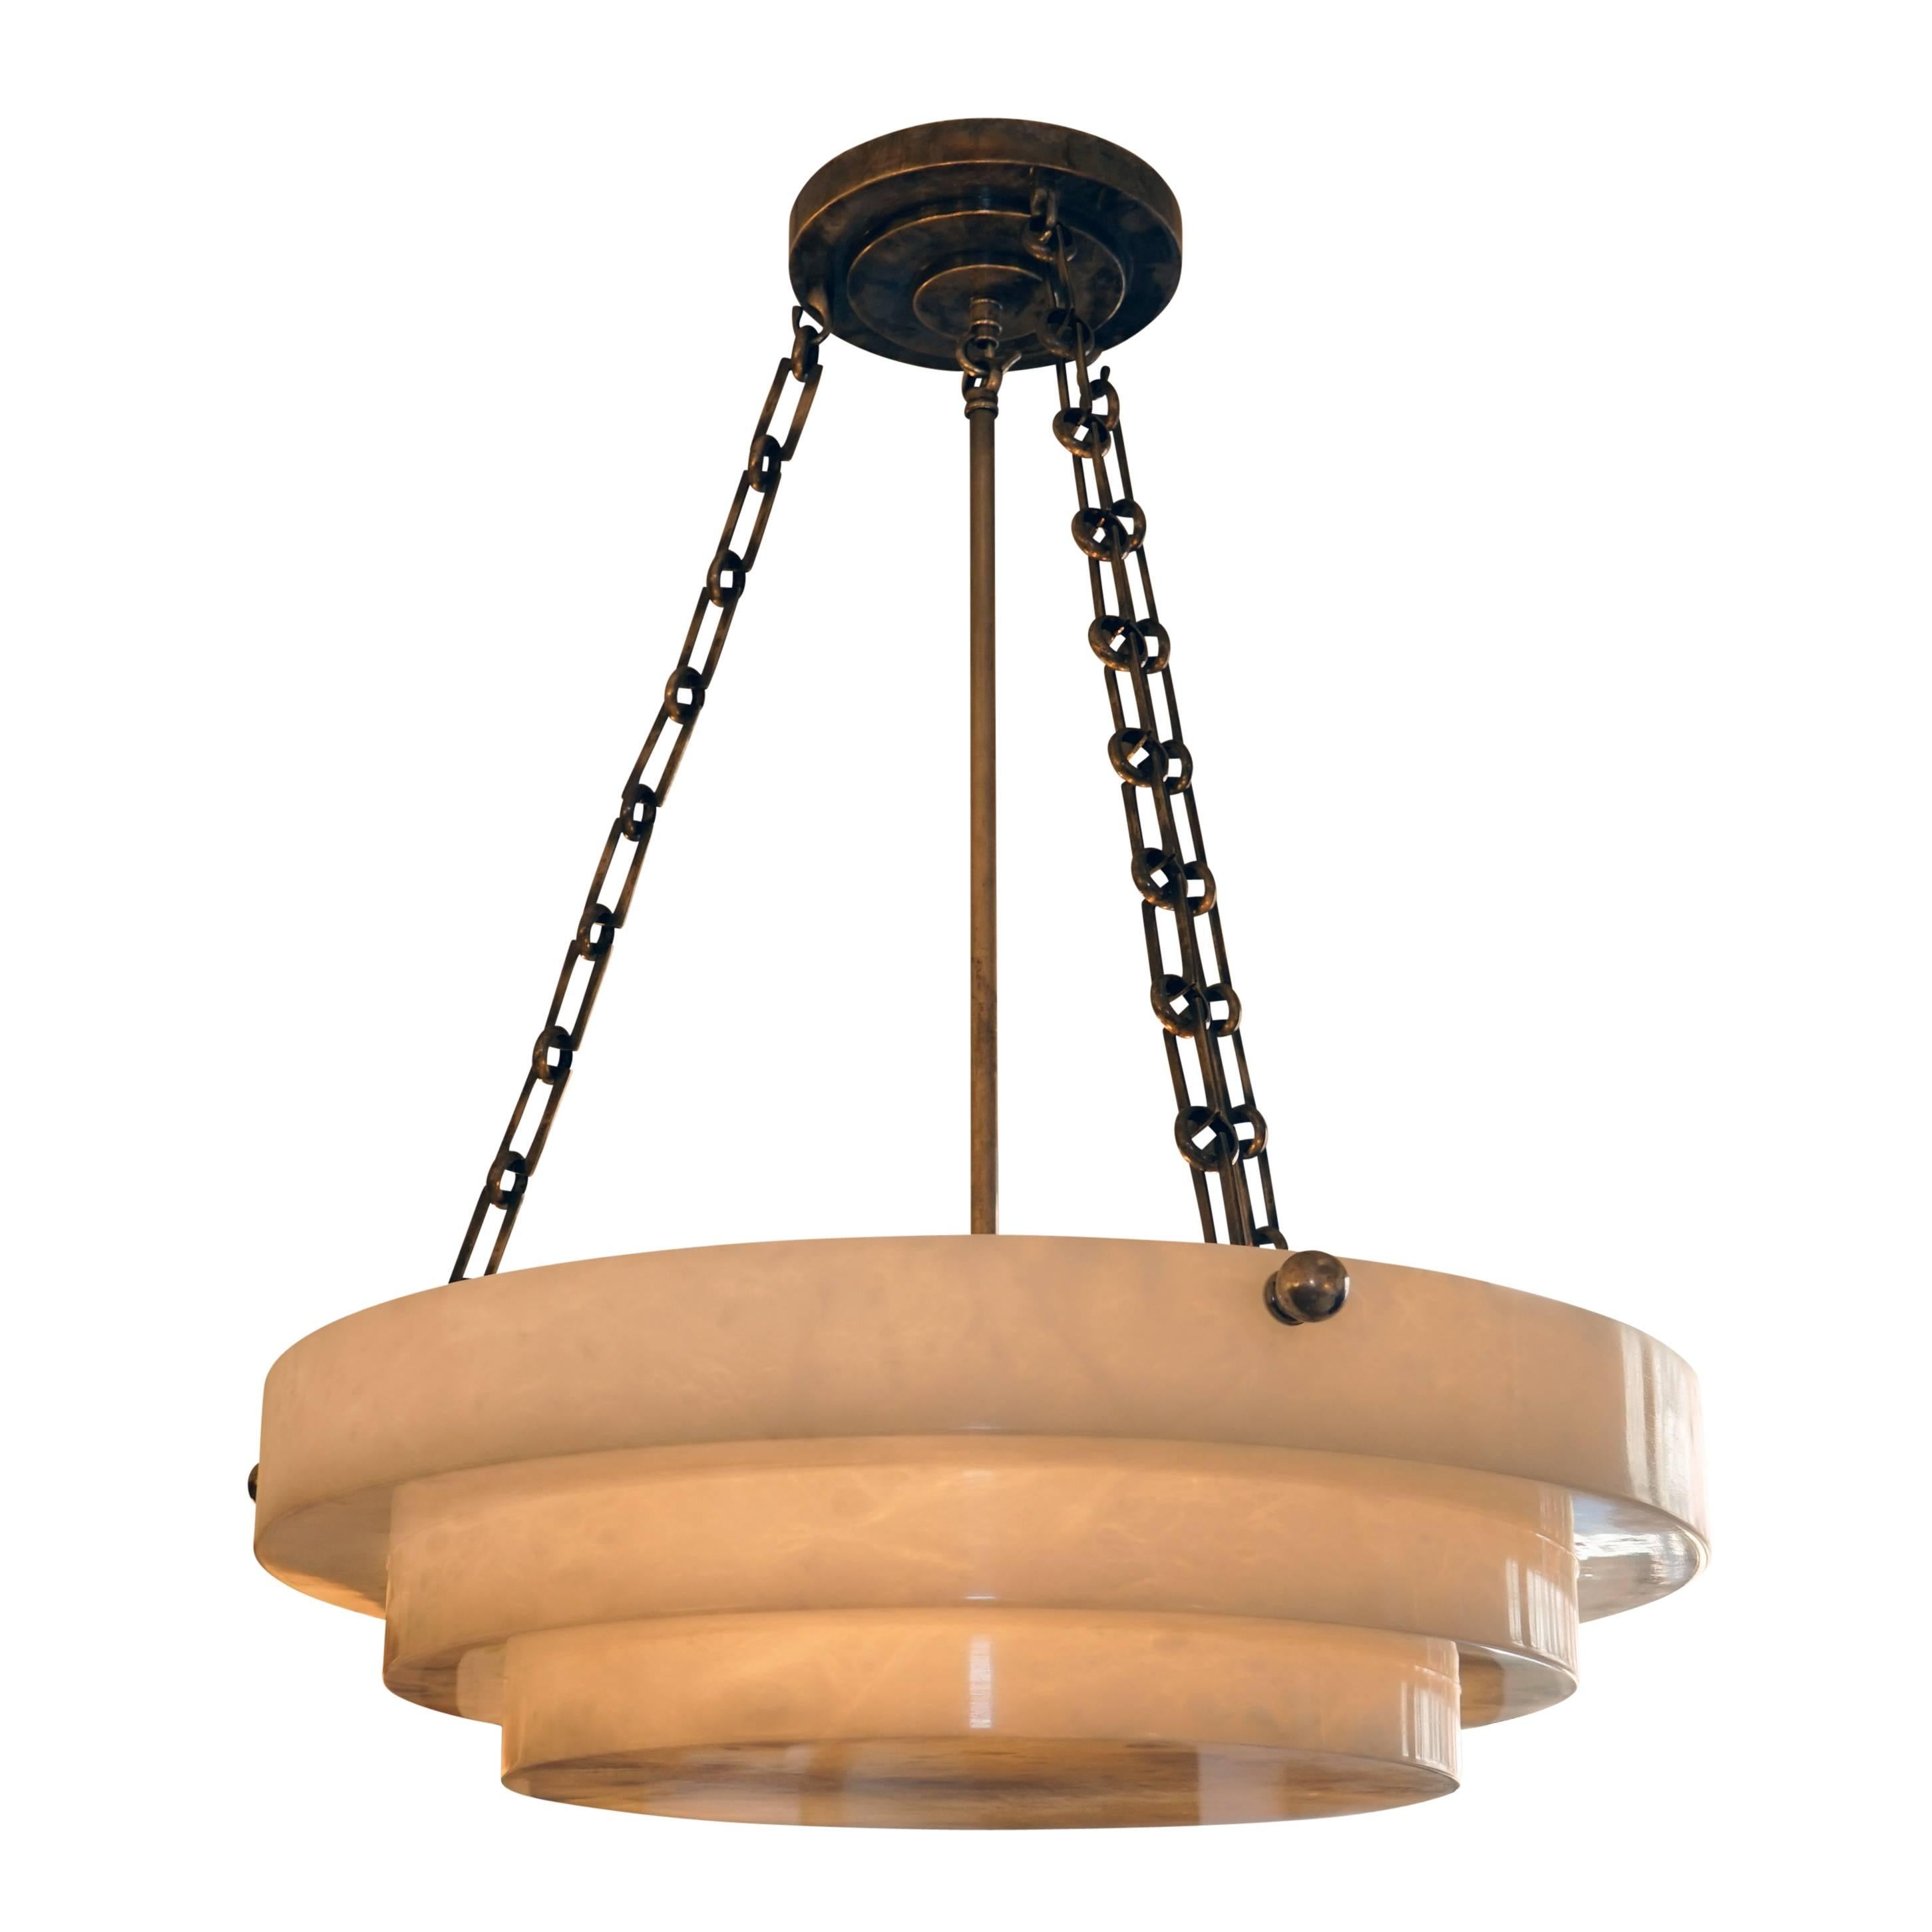 Carved from a single piece of white alabaster, the light features an Art Deco design, reminiscent of a three-tiered wedding cake. The pendant has recently been rewired on tarnished nickel chains and features a matching motif on the nickel canopy.